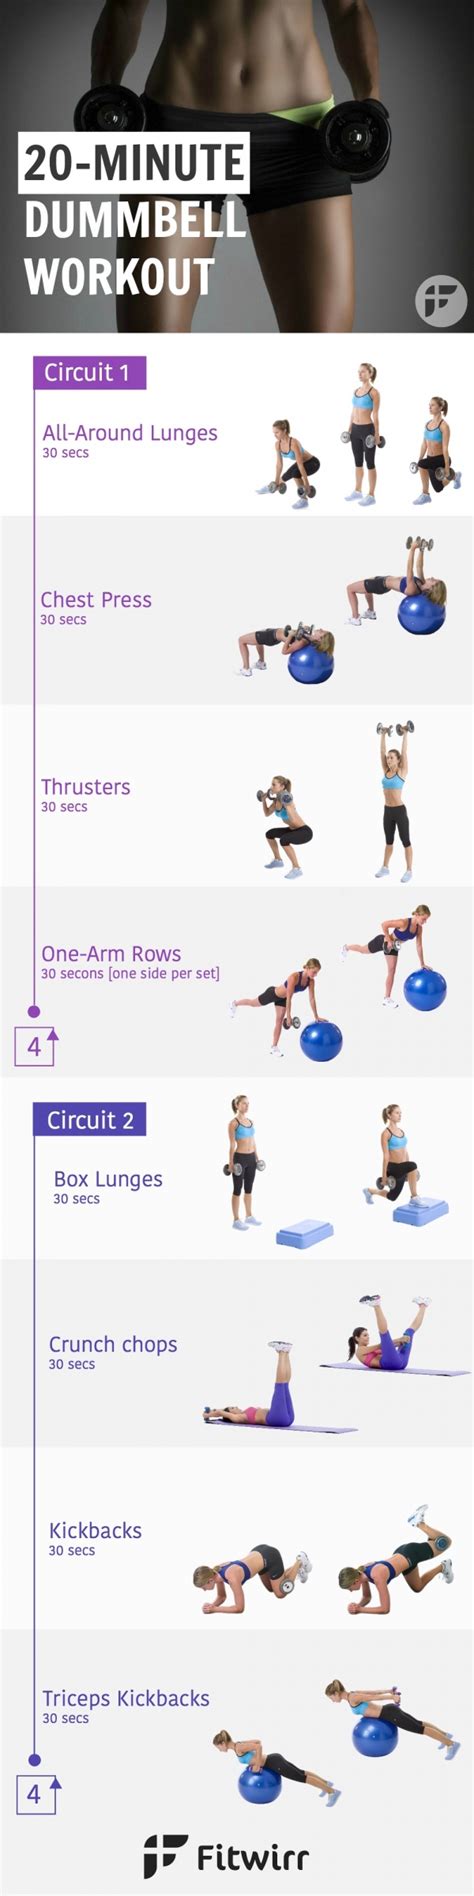 16 Dumbbell Workout Everybodys Got Time For That Try One Of